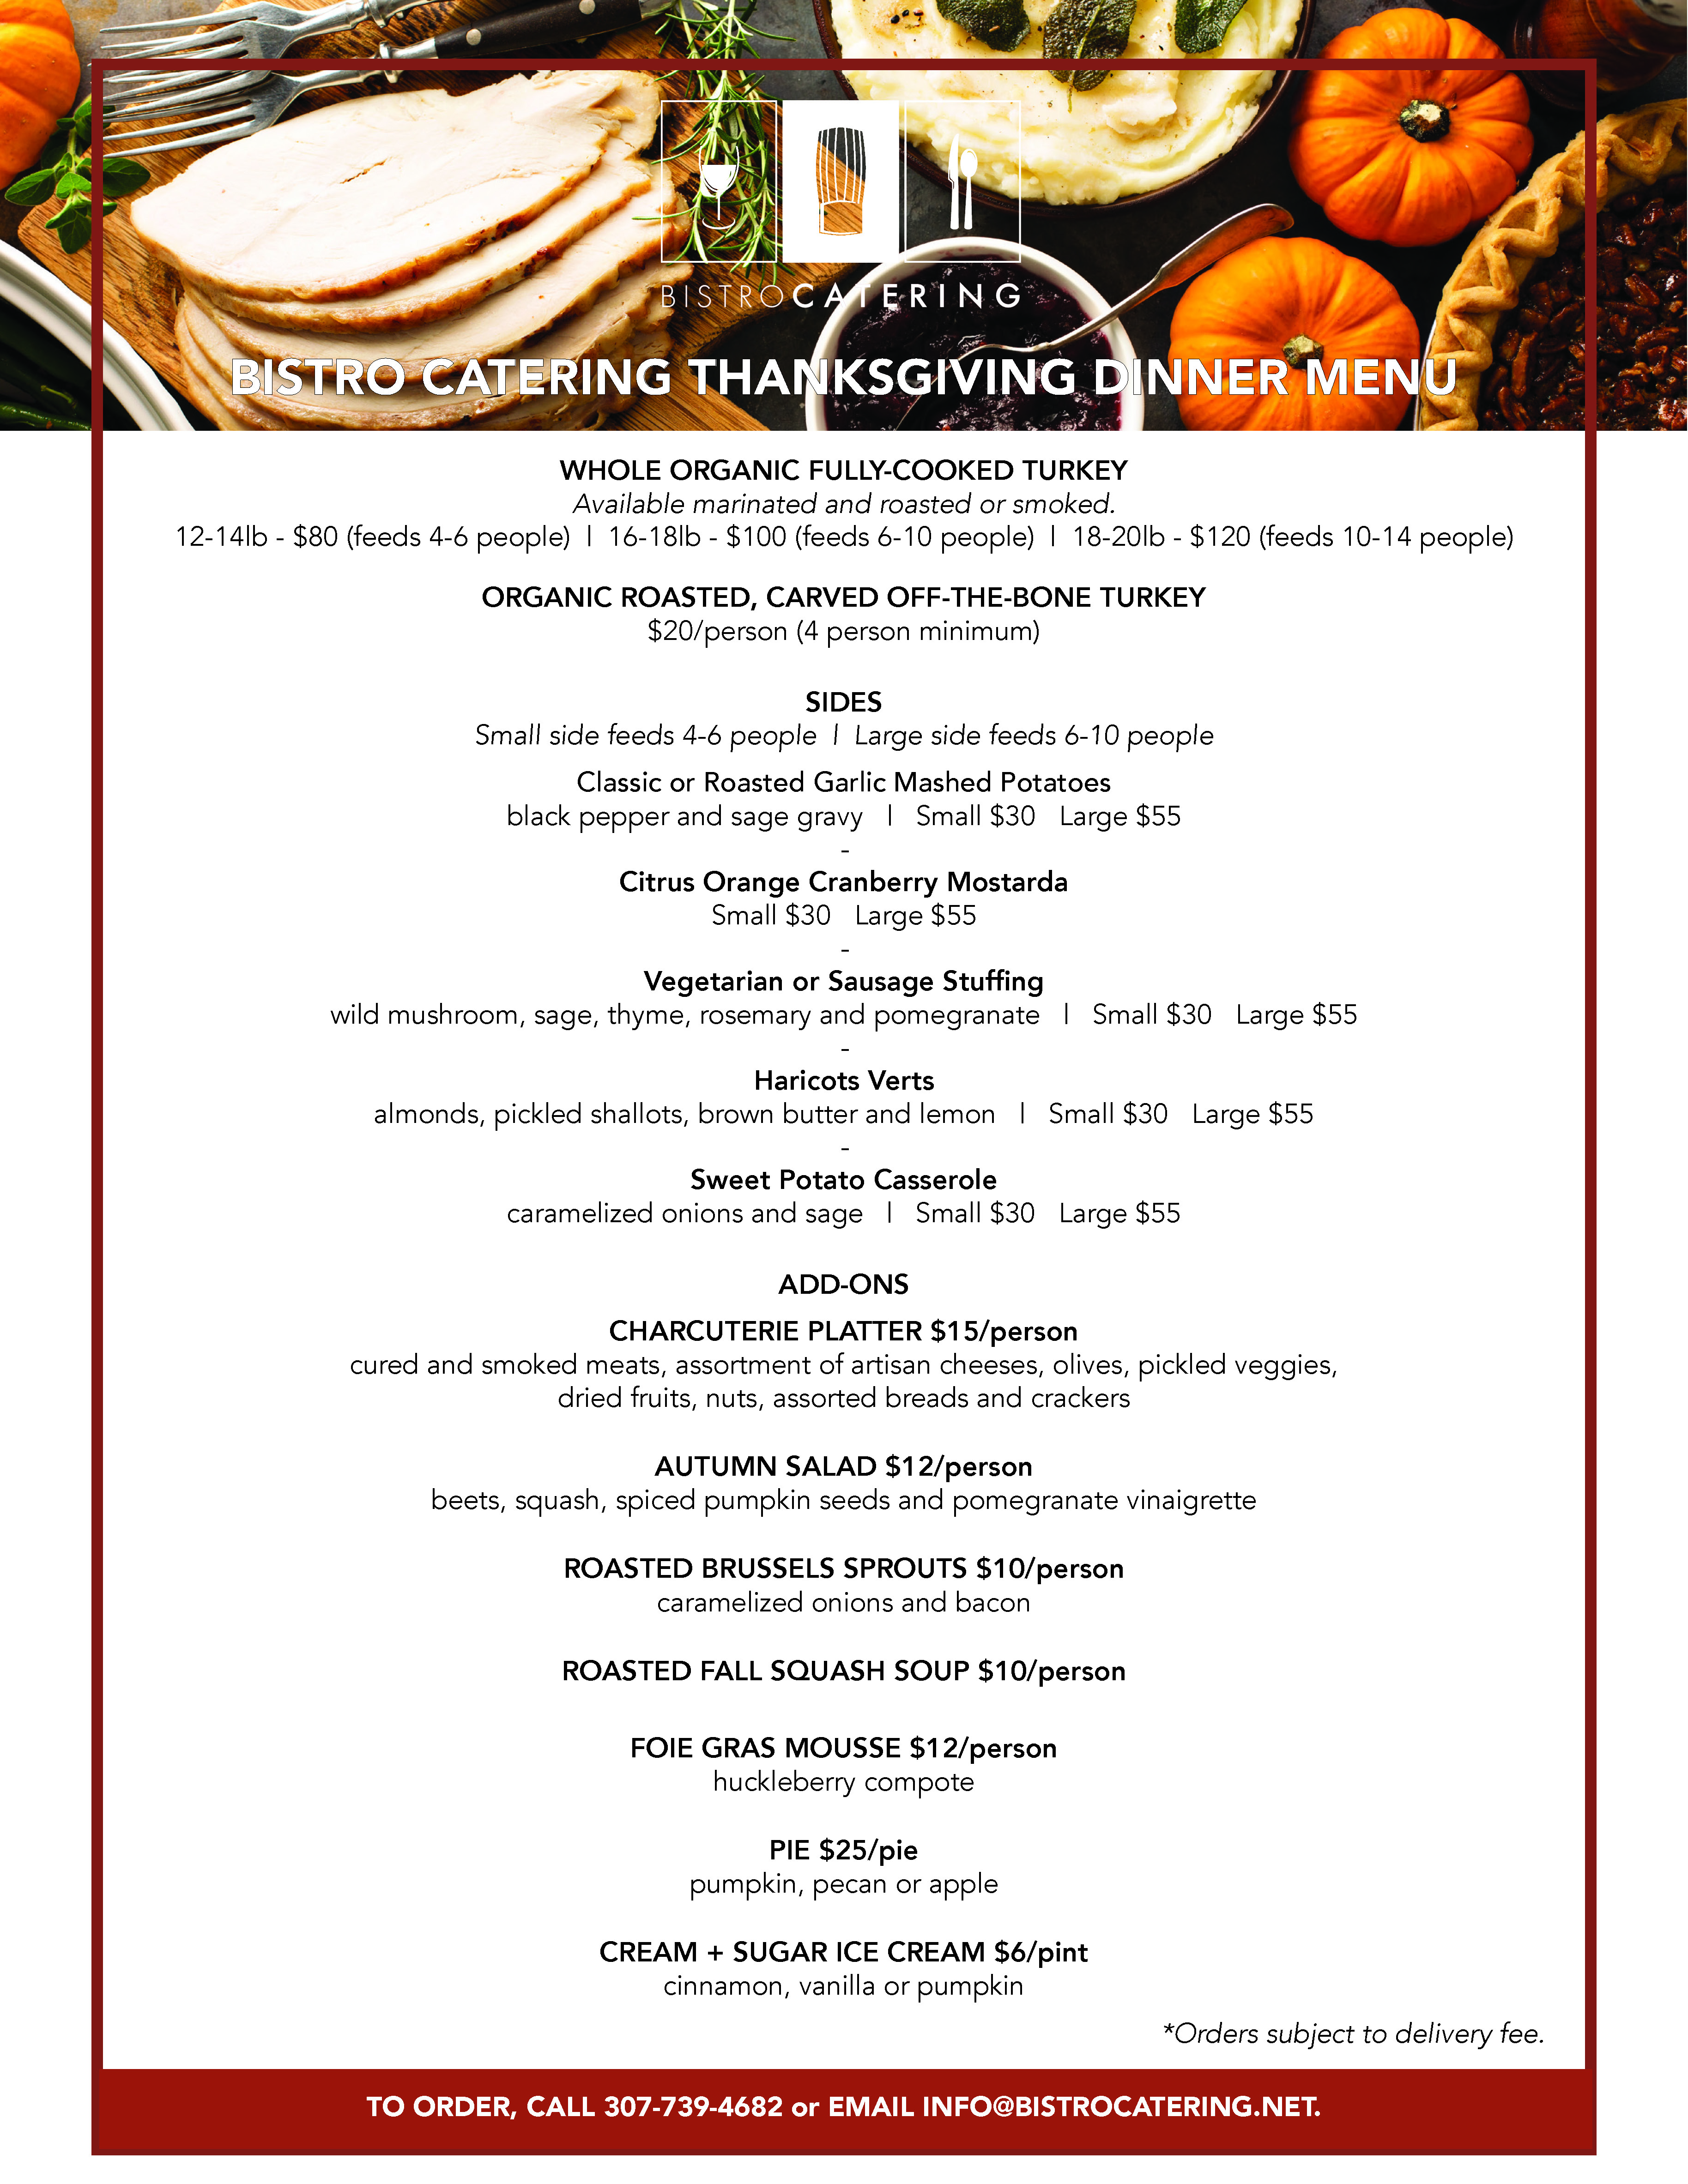 Bistro Catering Thanksgiving 2020 Catering Menu